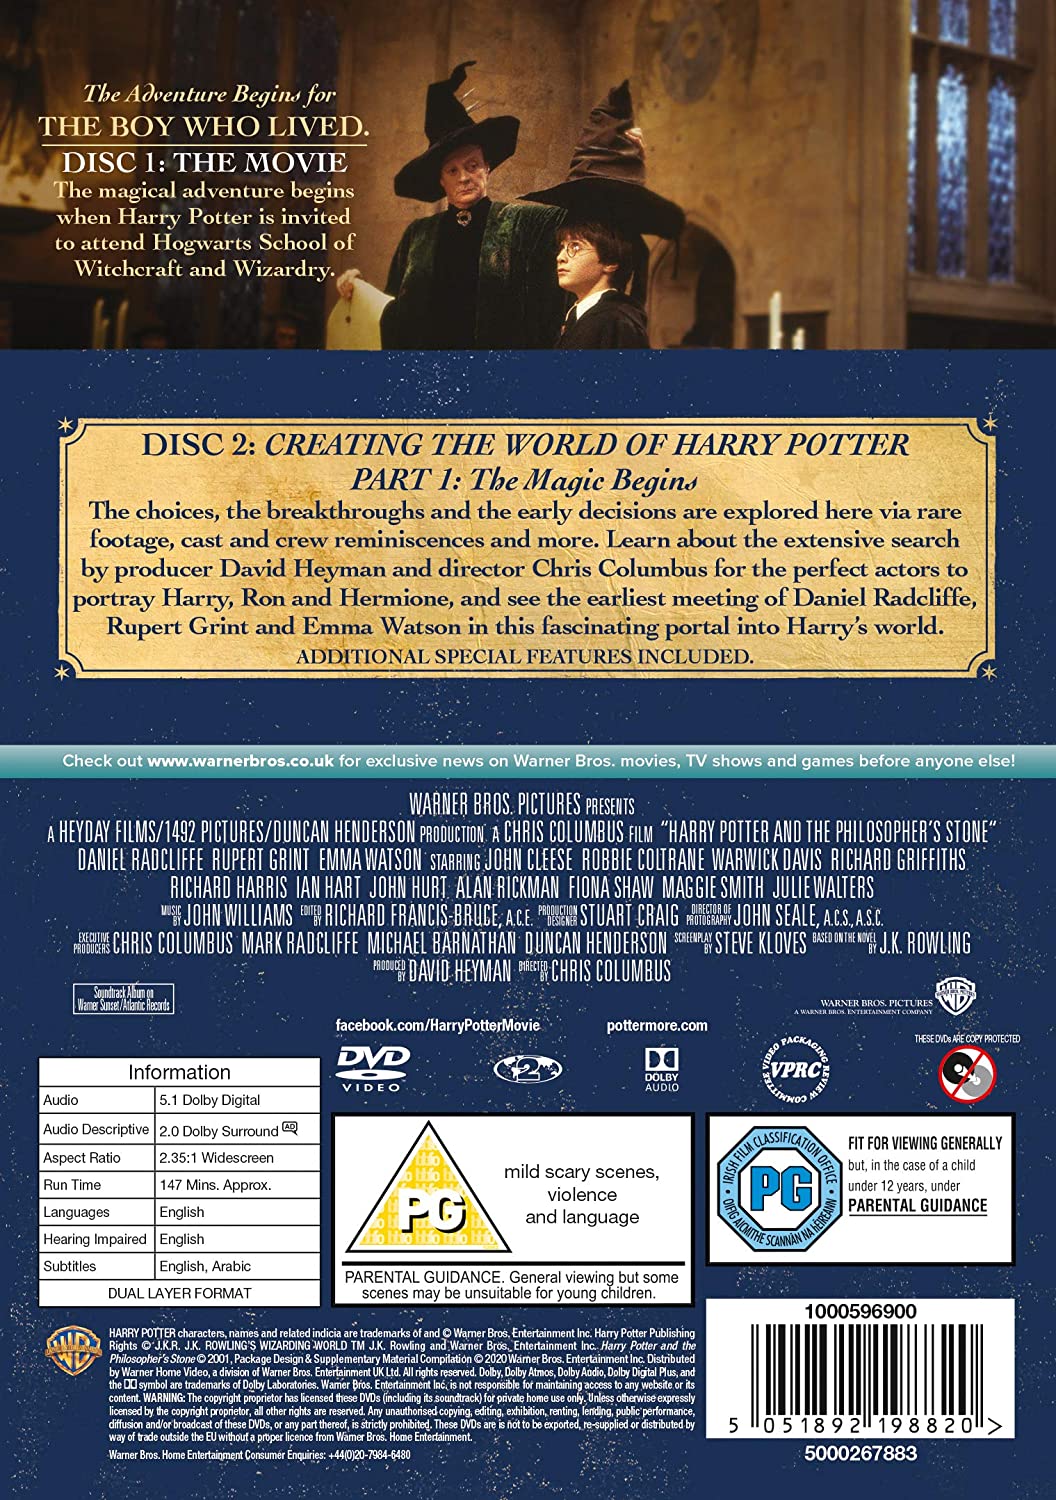 Harry Potter and the Philosopher's Stone [Year 1] [2016 Edition 2 Disk] [2001] - Fantasy/Family [DVD]